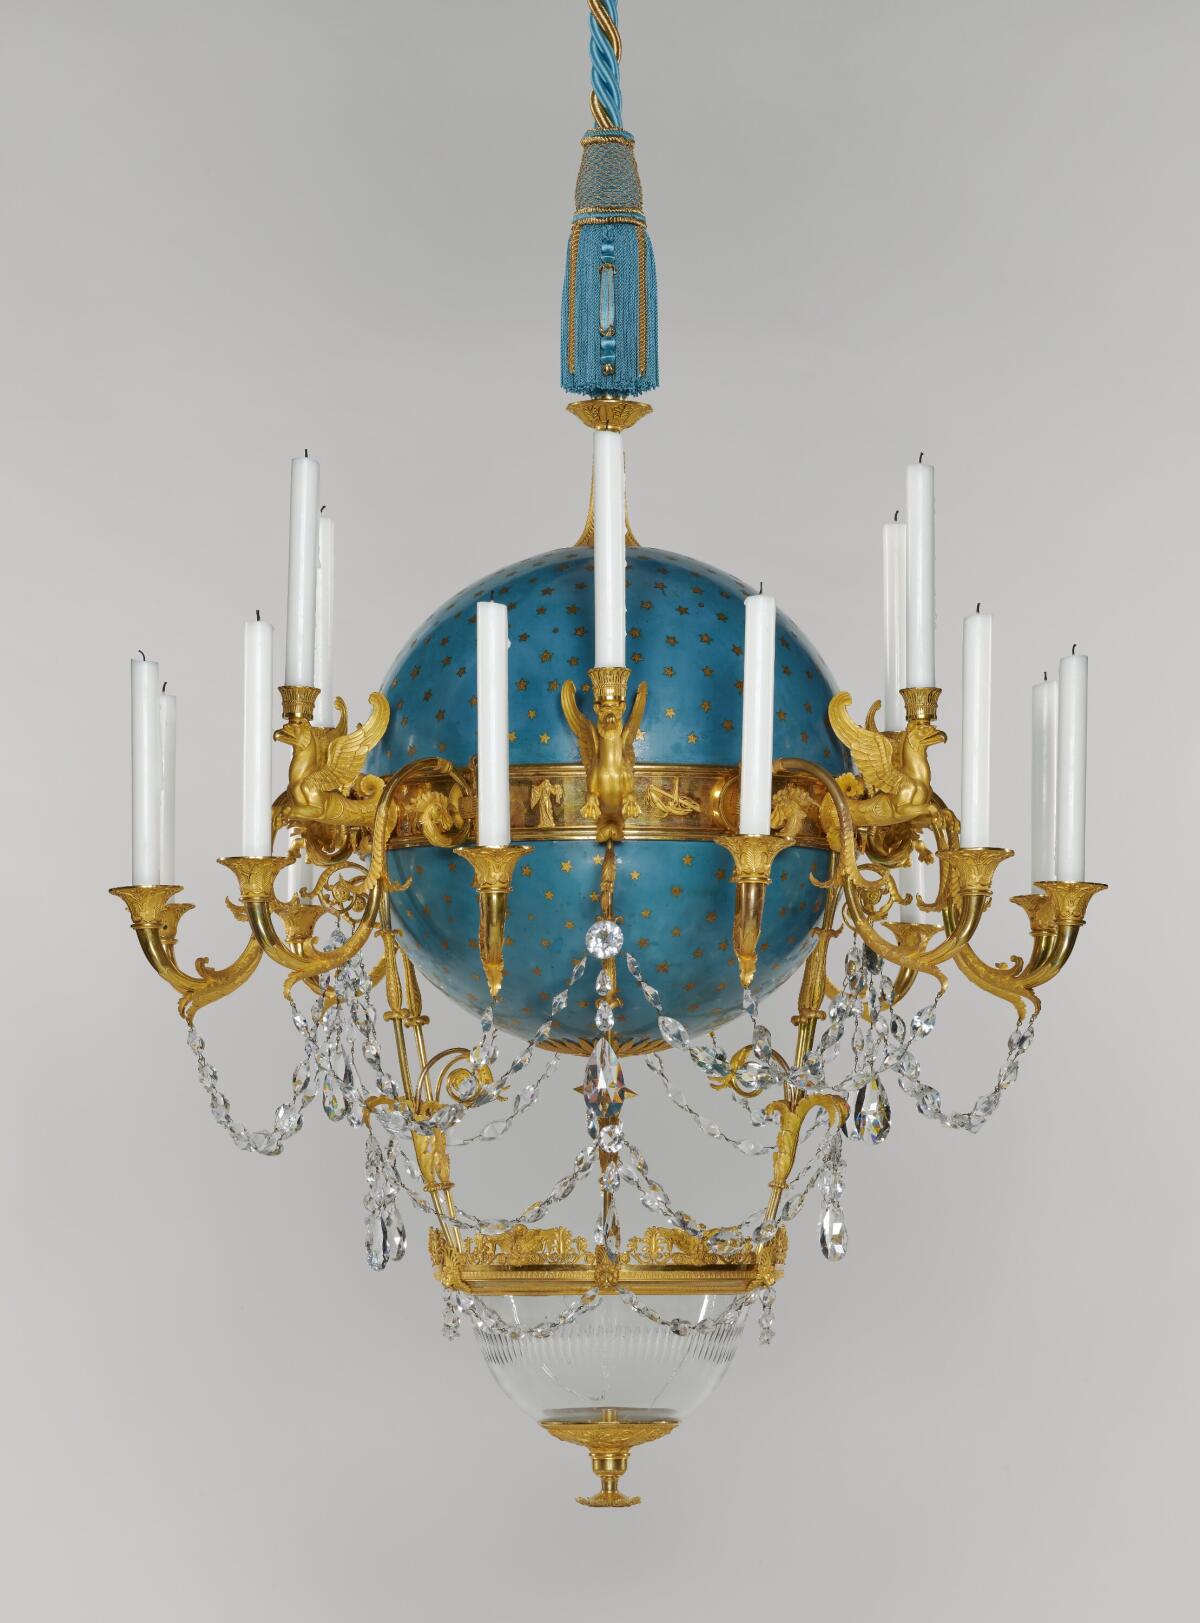 Gérard Jean Galle, “Chandelier,” around 1818–1819, gilt bronze and tin, glass, painted copper